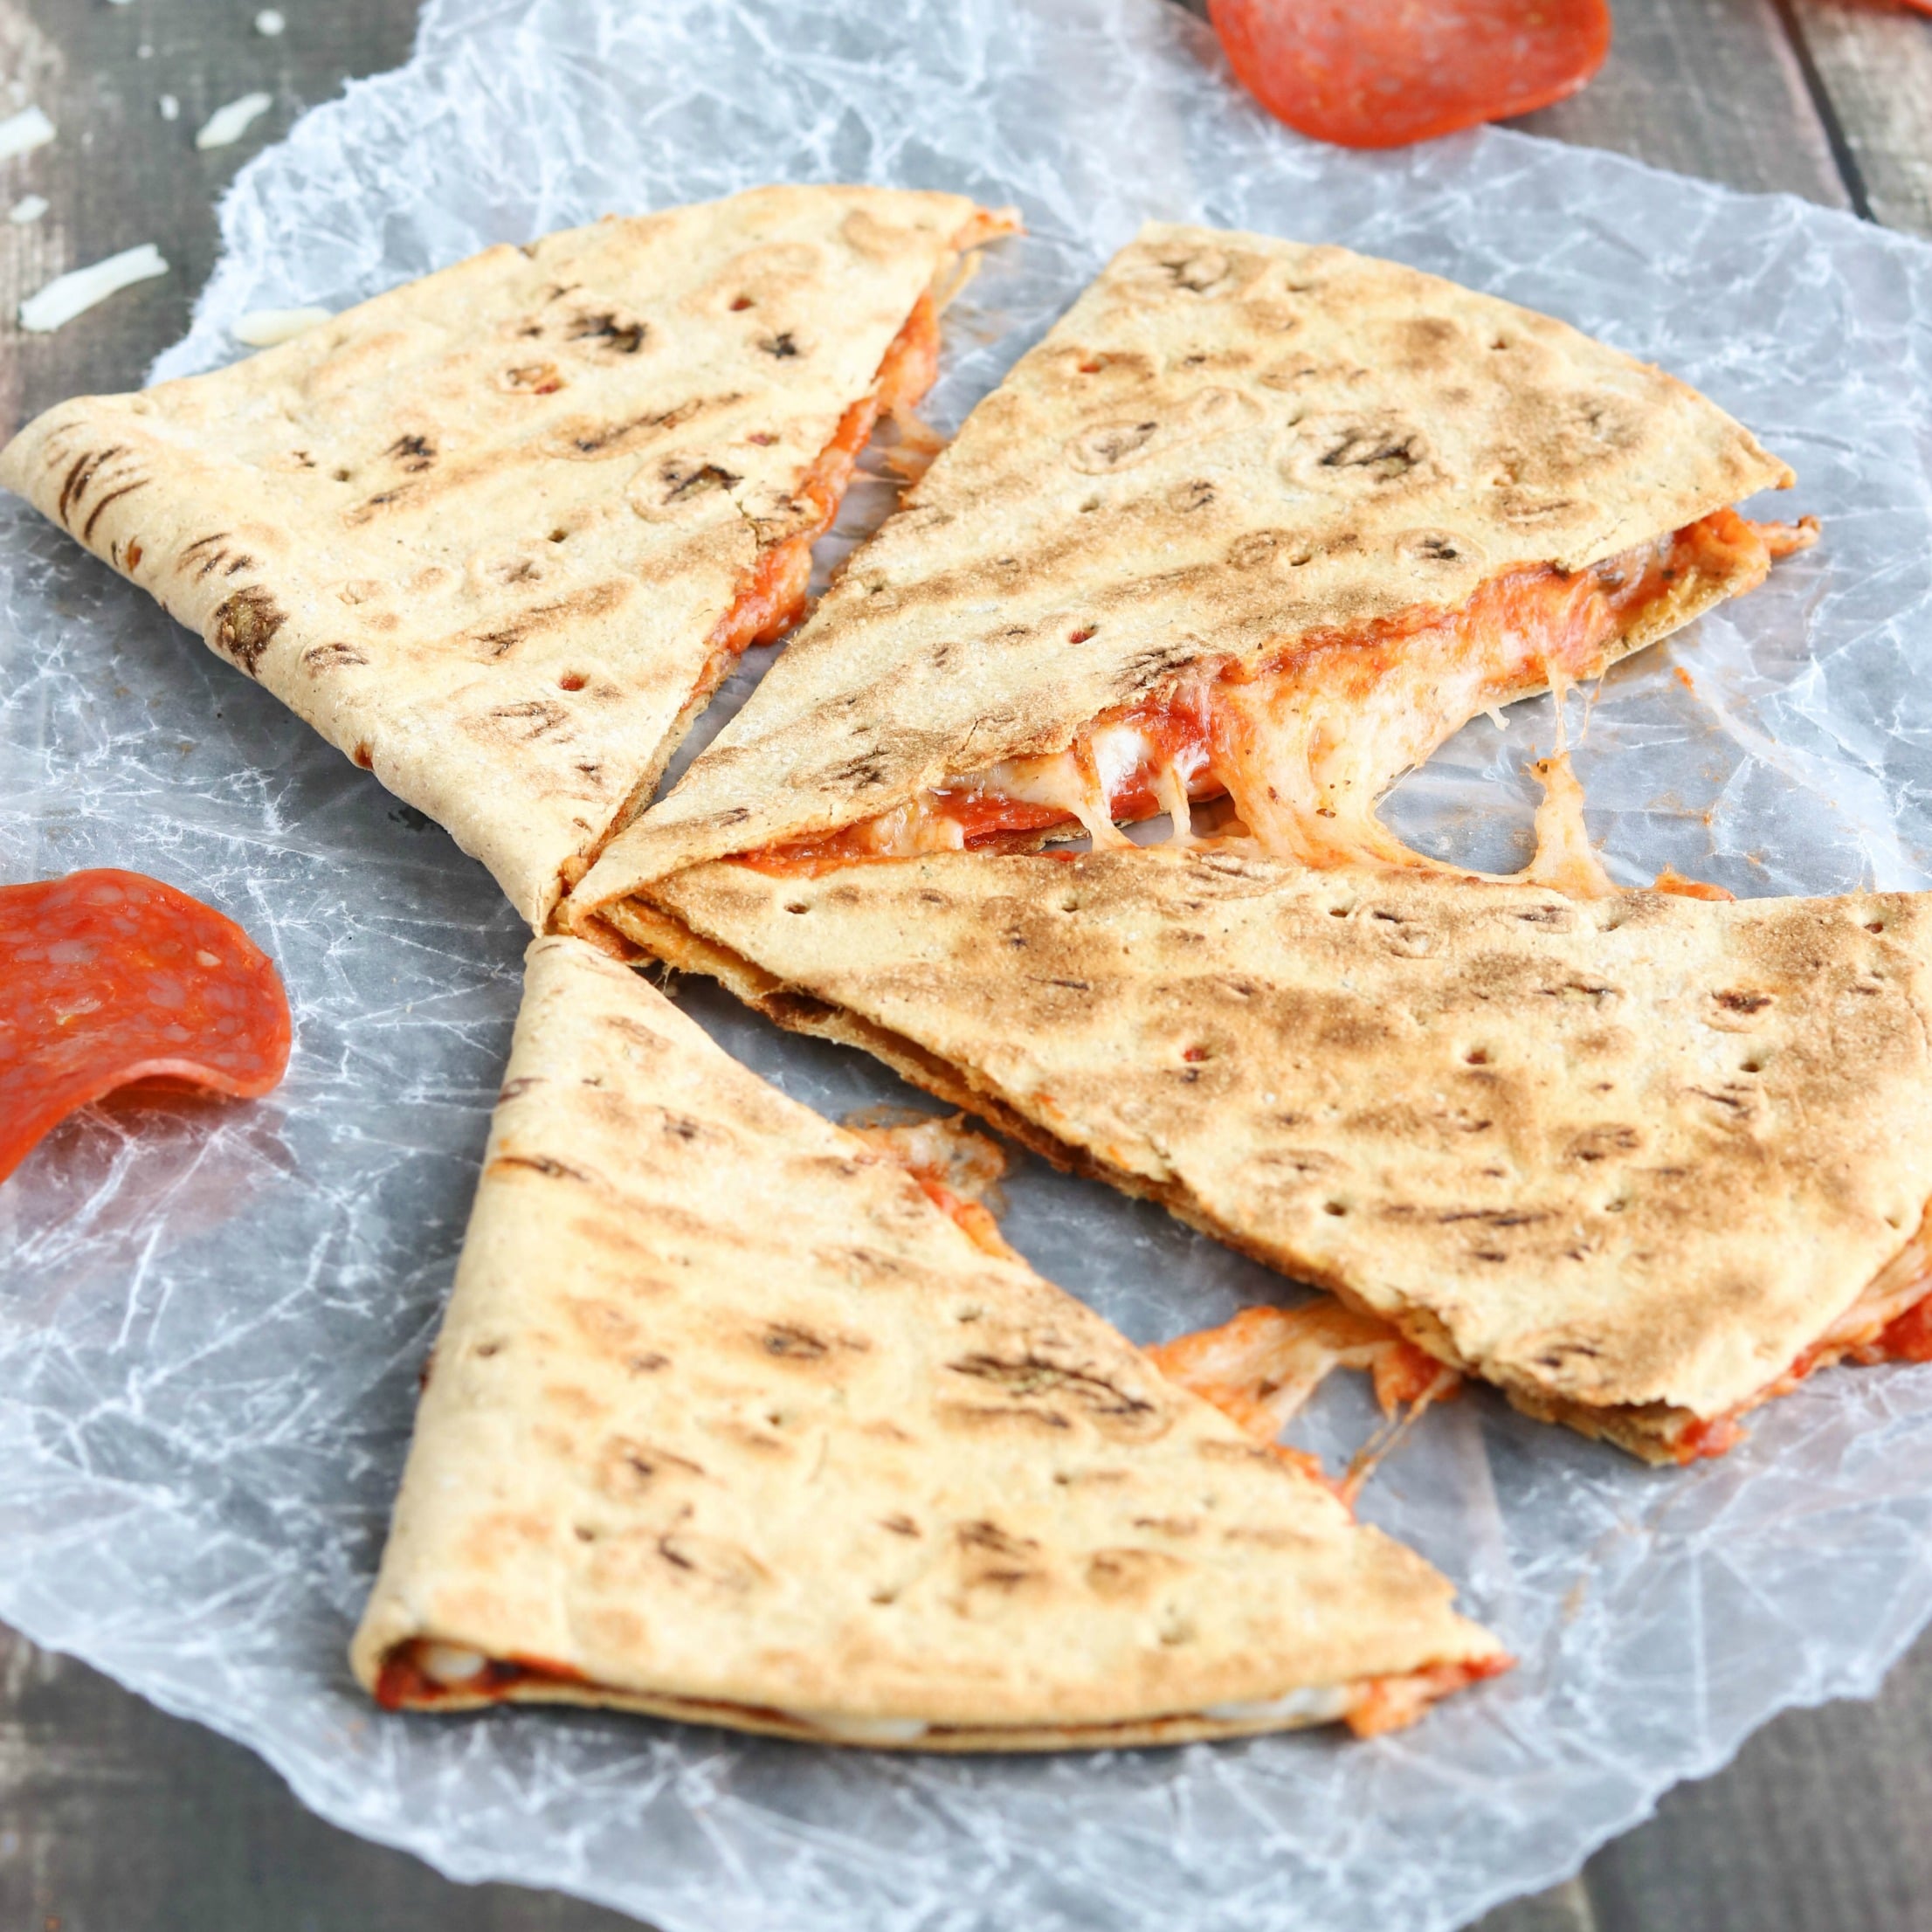 This easy Pepperoni Pizza Quesadilla recipe takes just minutes! With fiber-rich whole grains and lots of protein, it’s perfect as a quick meal or a hearty power snack! | www.TwoHealthyKitchens.com